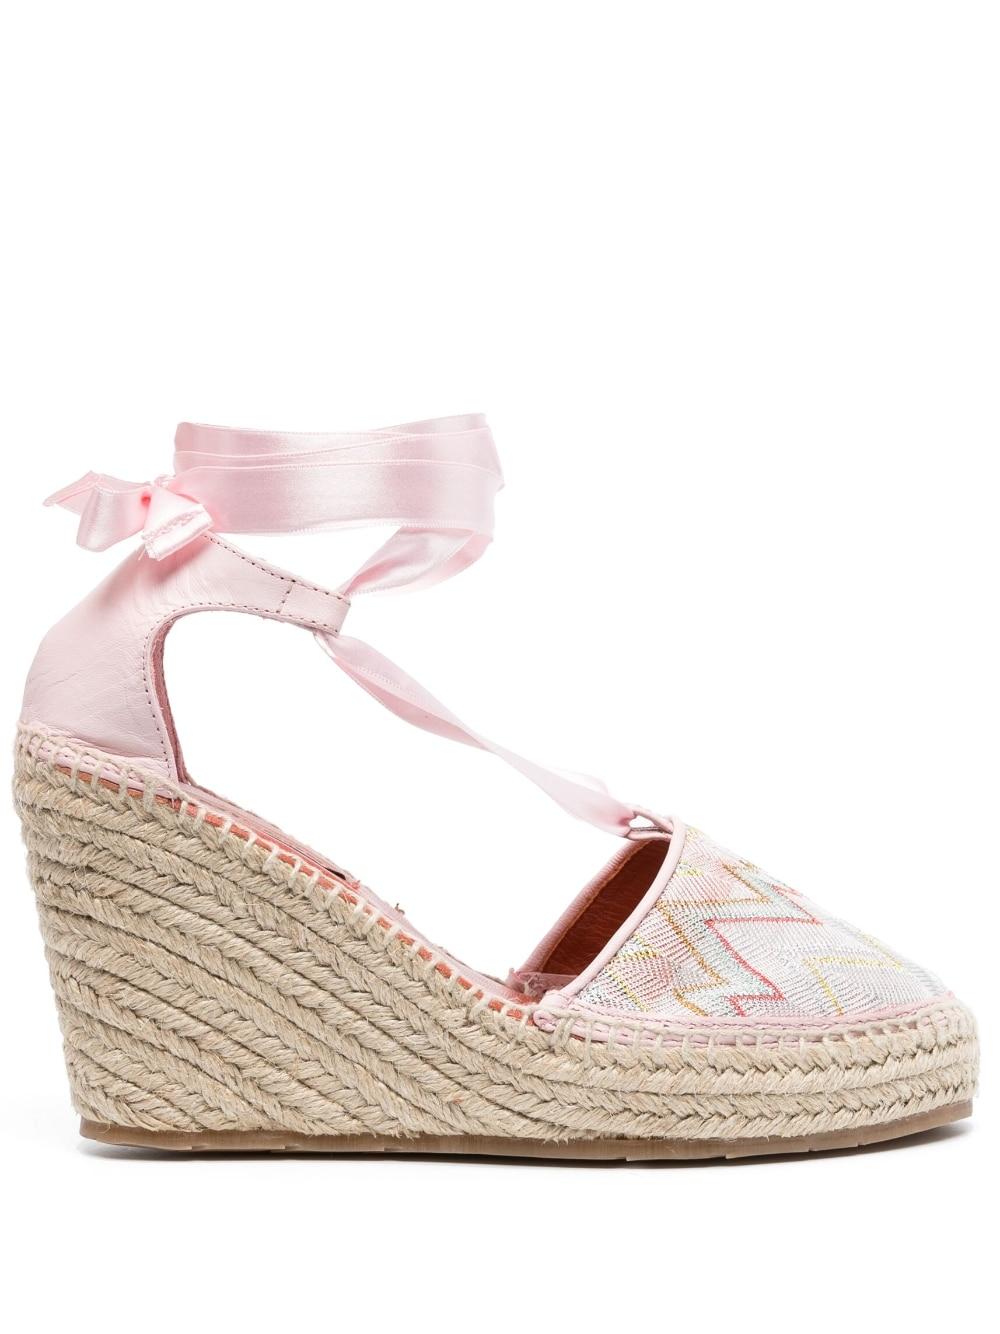 Missoni Zigzag-woven Wedge Espadrilles in Pink | Lyst